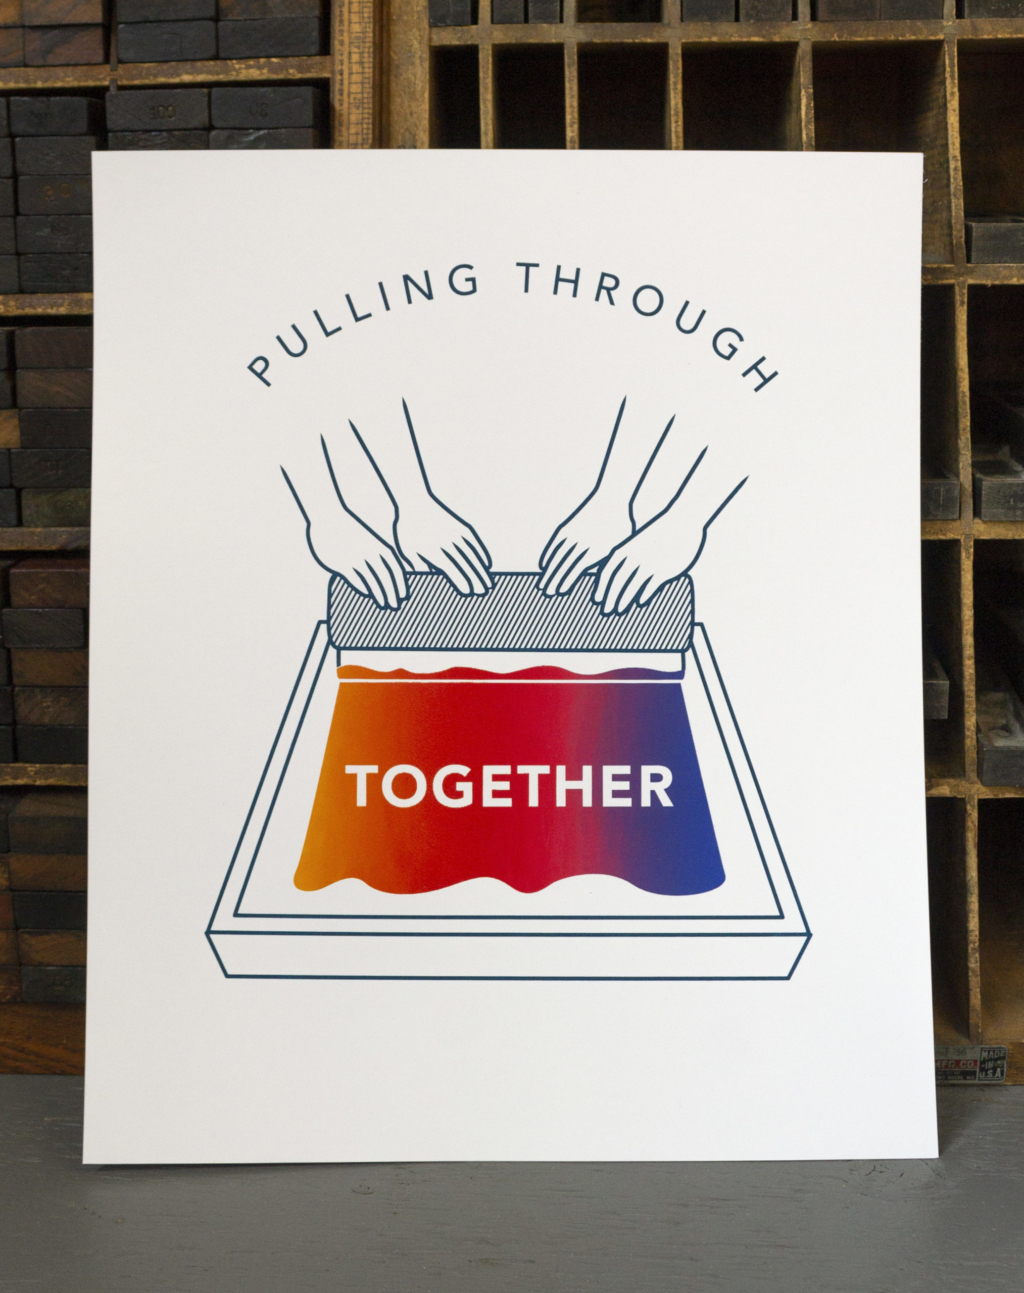 White paper print with screenprinted illustration of two pairs of hands pulling a squeegee on a screen with the word 'Pulling Through Together'. The words pulling through is laid out in an arch above the hands, and the word together is in the screen. The ink in the screen is a gradient of orange, red, pink and blue.